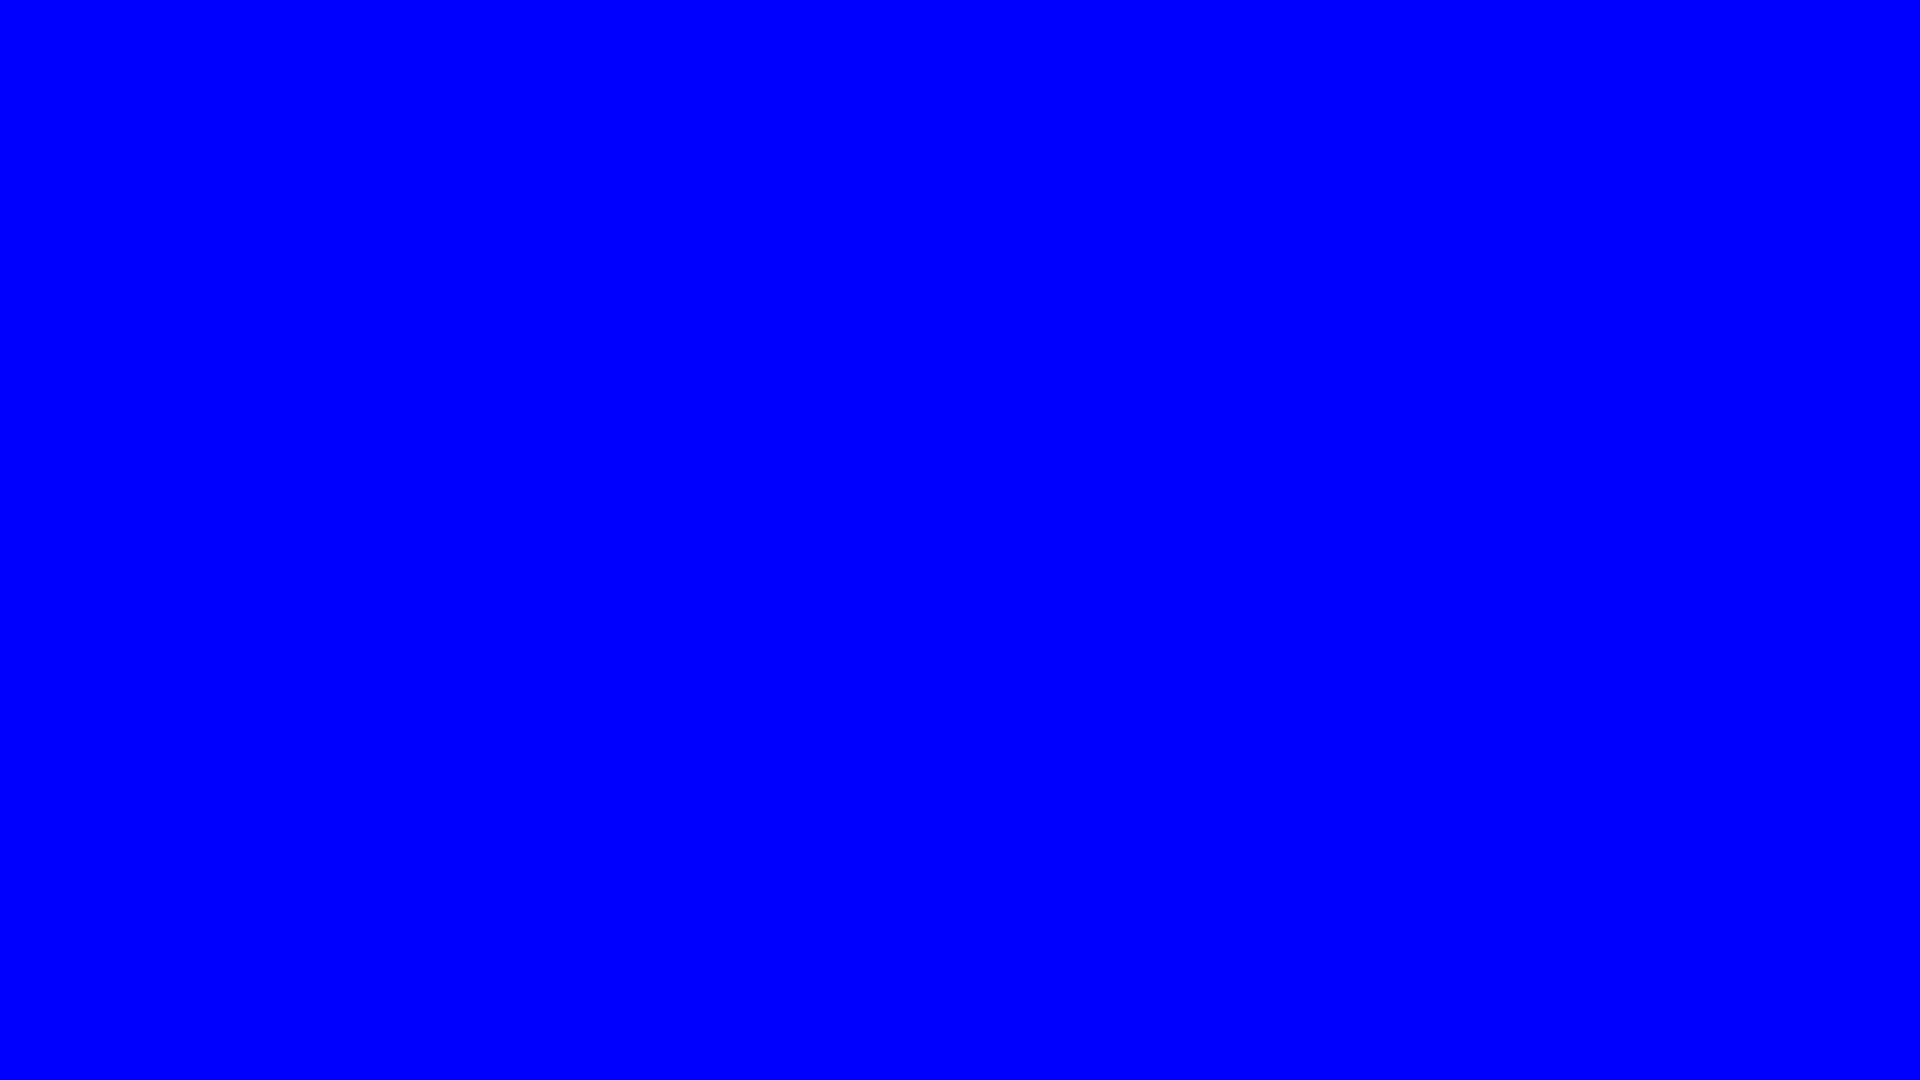 wisetdifw64 sys blue screen